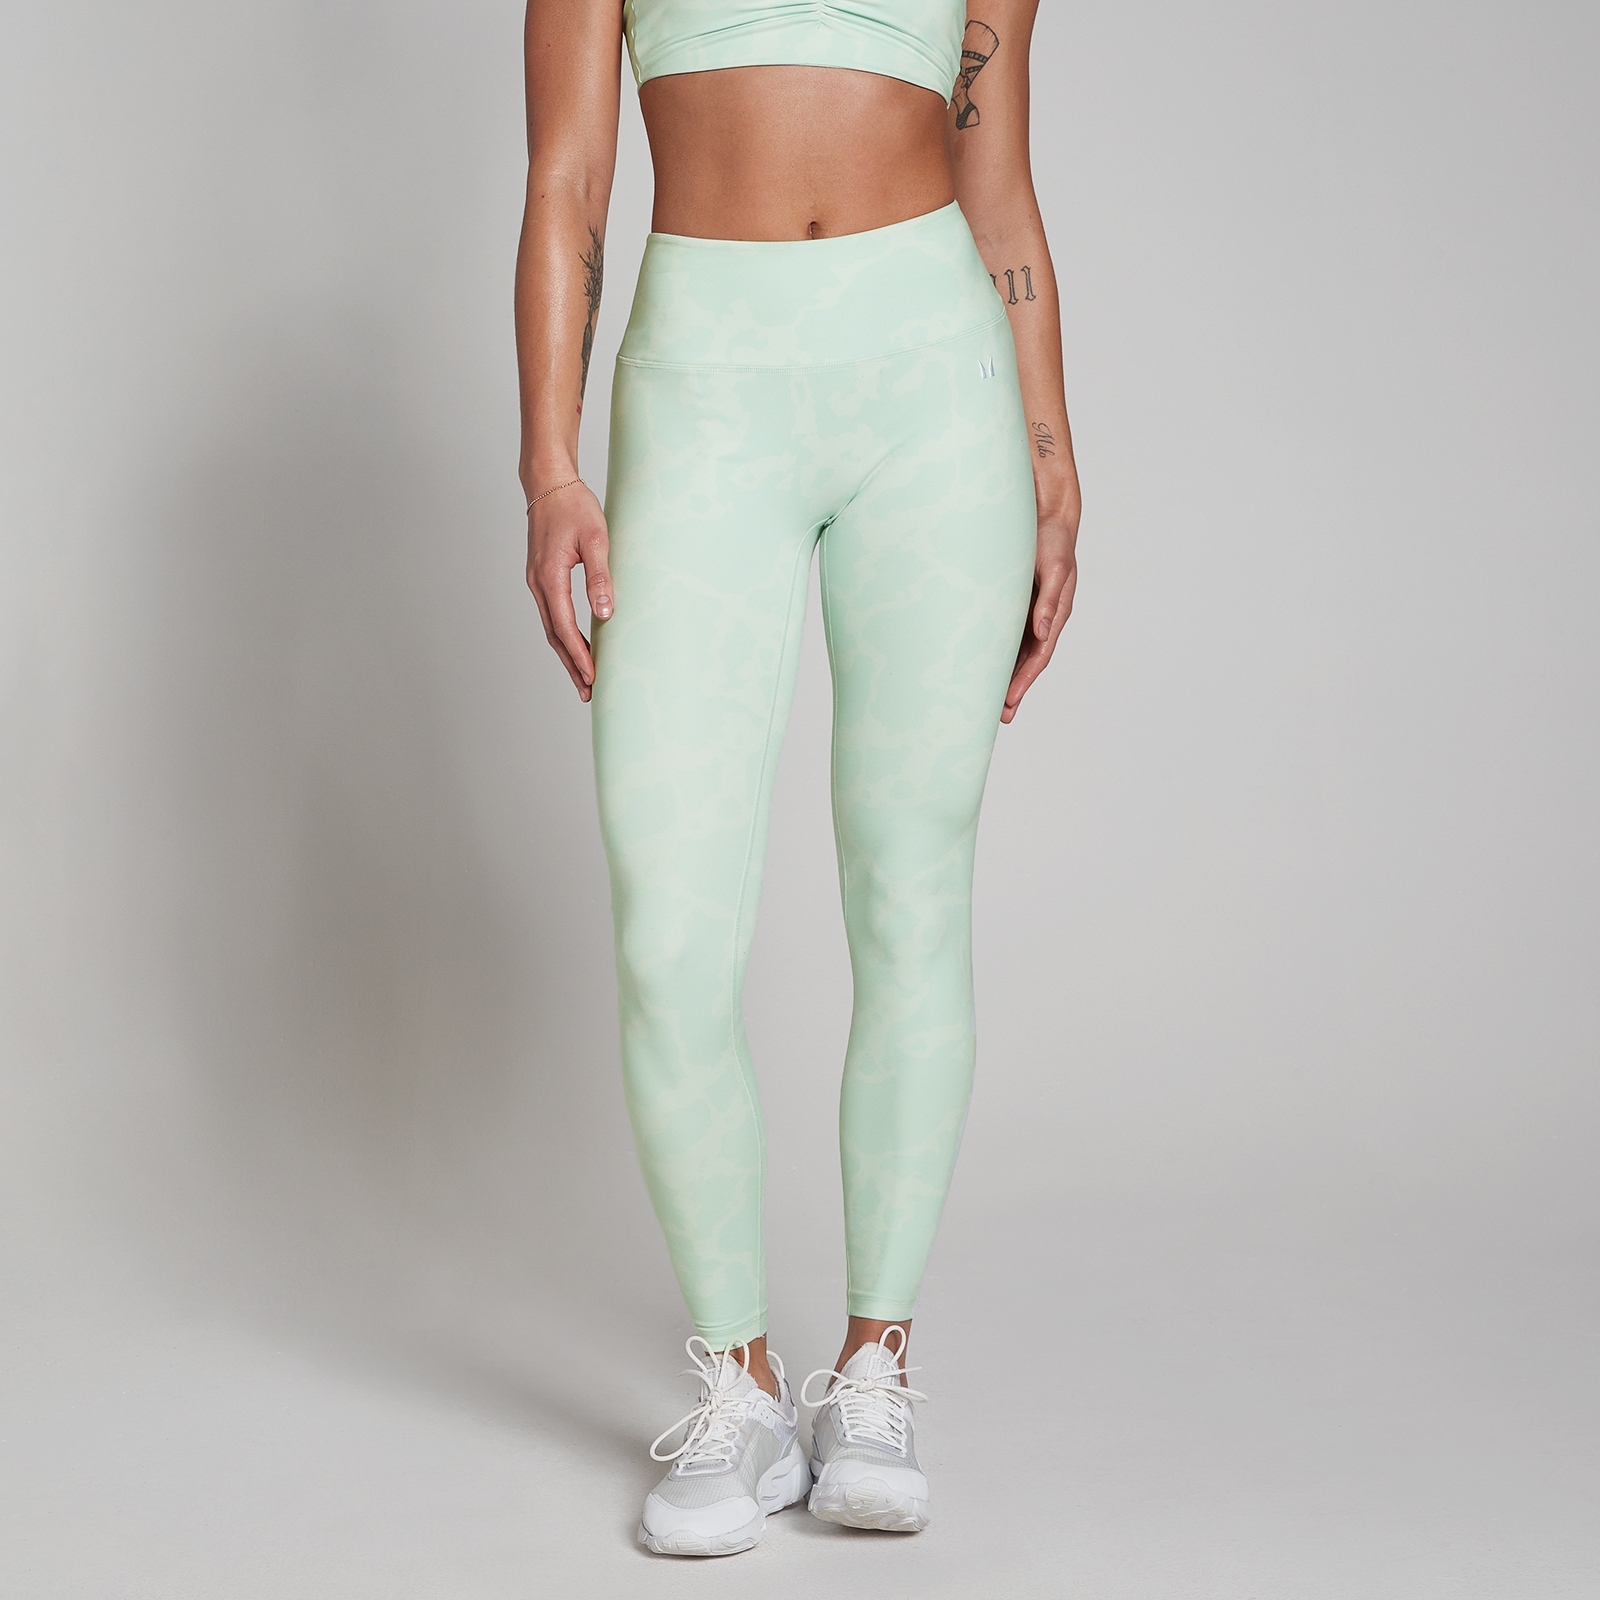 Legging MP Tempo Abstract pour femmes – Menthe clair - XS